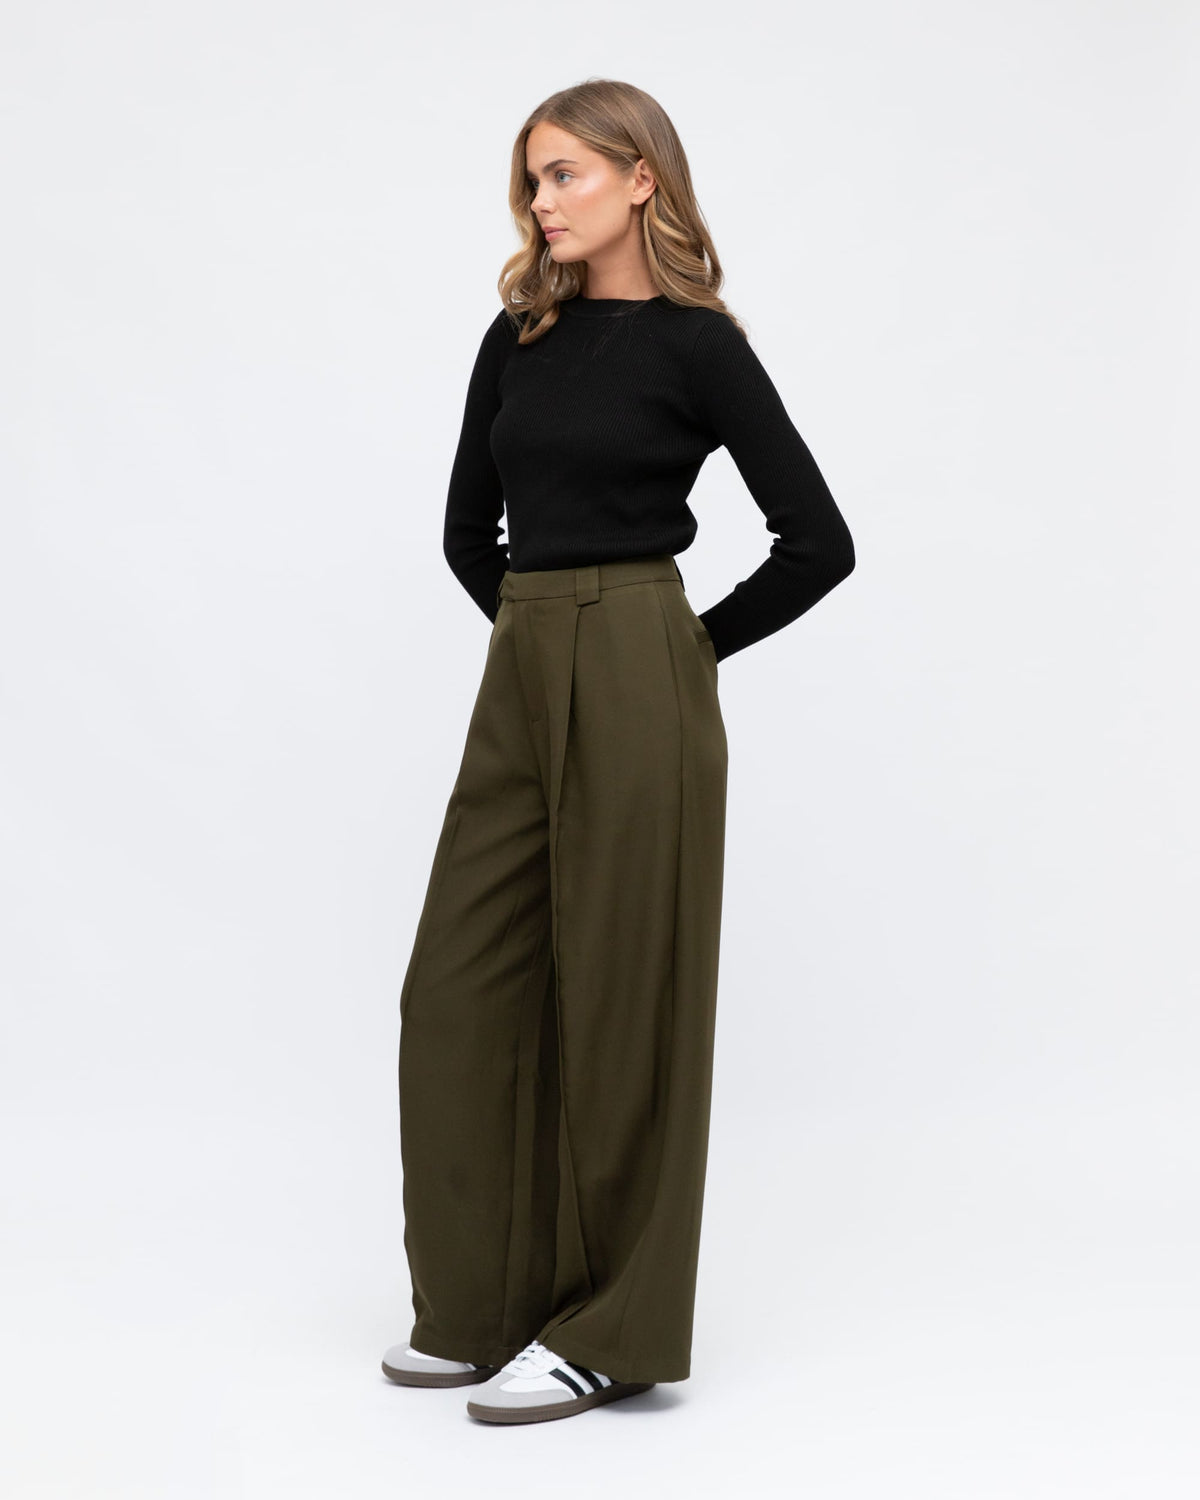 RELAXED FIT SEAMED TROUSERS